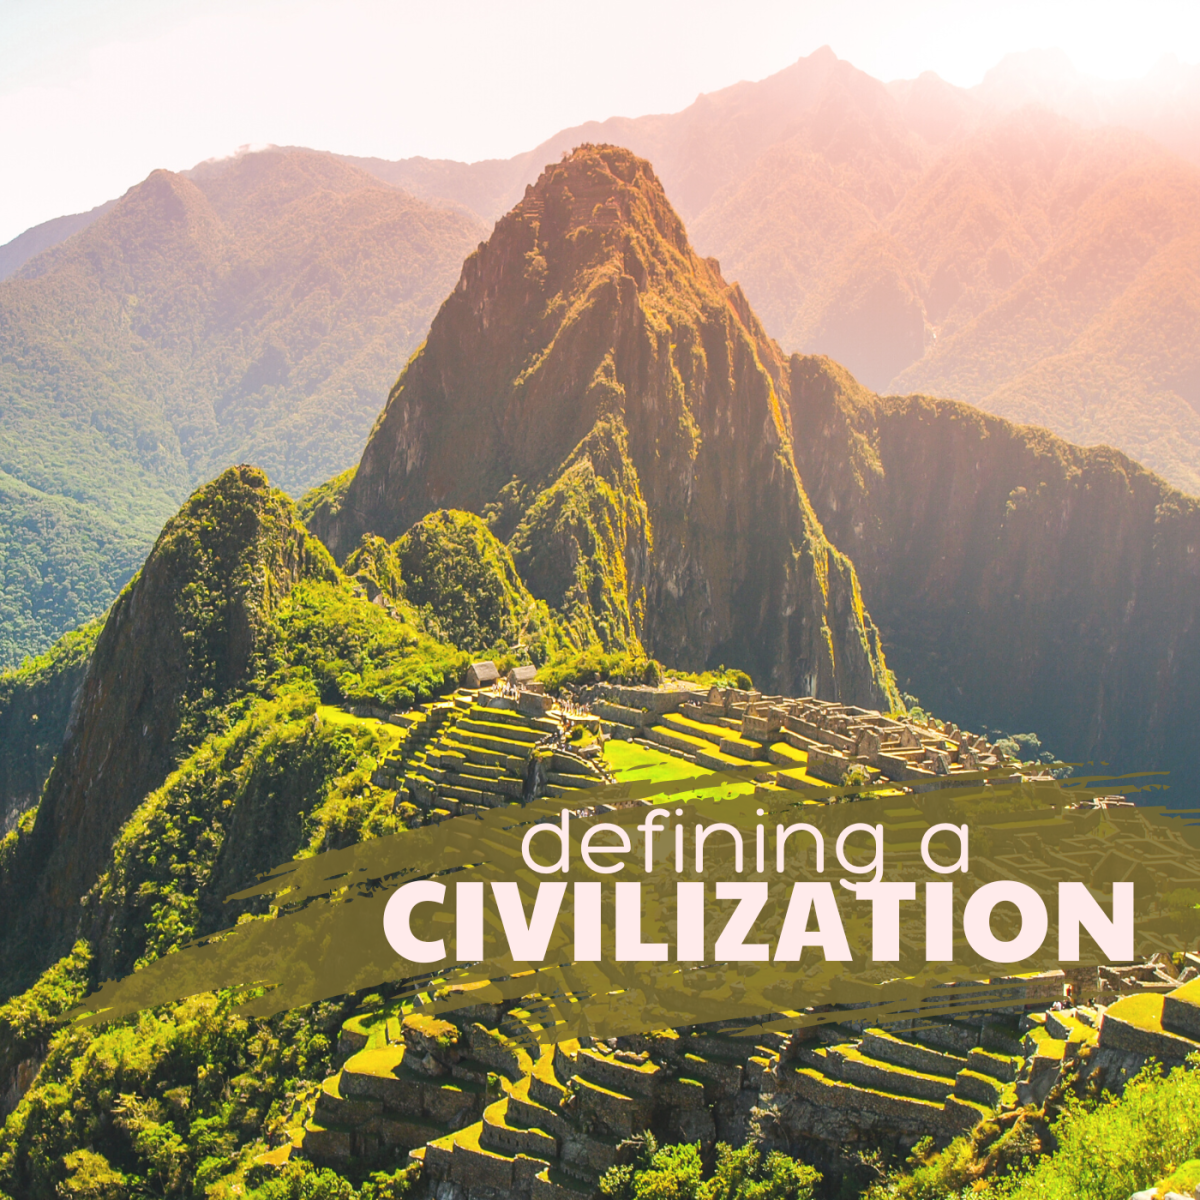 What are examples of civilizations throughout history? 